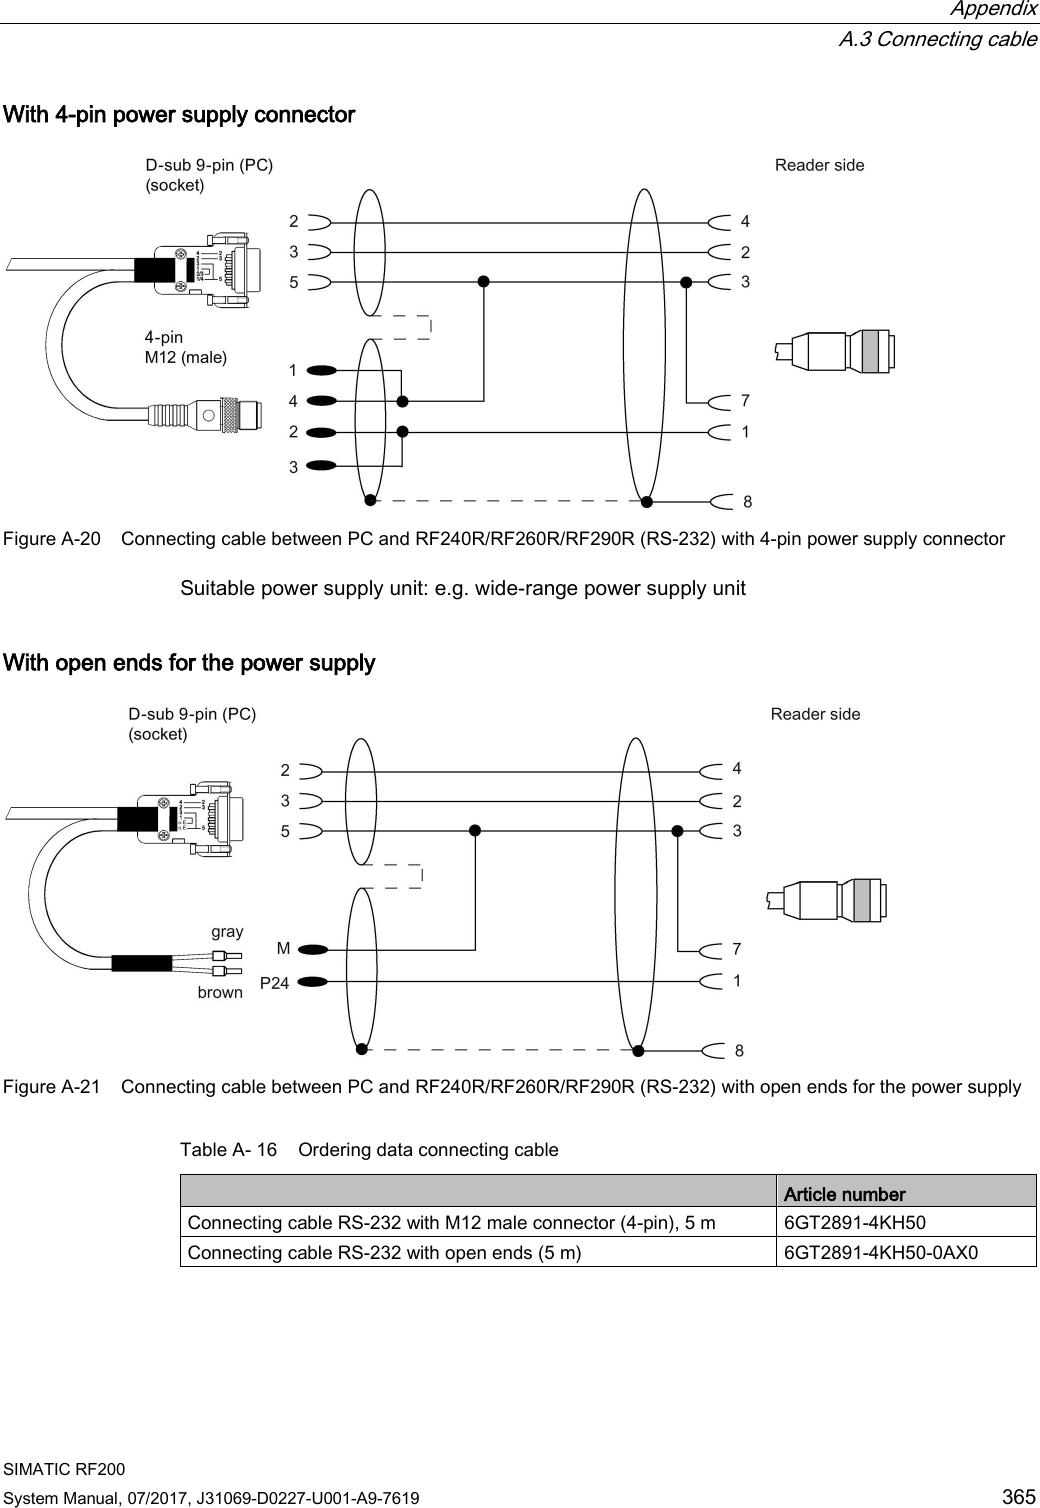  Appendix  A.3 Connecting cable SIMATIC RF200 System Manual, 07/2017, J31069-D0227-U001-A9-7619 365 With 4-pin power supply connector  Figure A-20 Connecting cable between PC and RF240R/RF260R/RF290R (RS-232) with 4-pin power supply connector Suitable power supply unit: e.g. wide-range power supply unit  With open ends for the power supply  Figure A-21 Connecting cable between PC and RF240R/RF260R/RF290R (RS-232) with open ends for the power supply Table A- 16 Ordering data connecting cable  Article number Connecting cable RS-232 with M12 male connector (4-pin), 5 m 6GT2891-4KH50 Connecting cable RS-232 with open ends (5 m) 6GT2891-4KH50-0AX0 